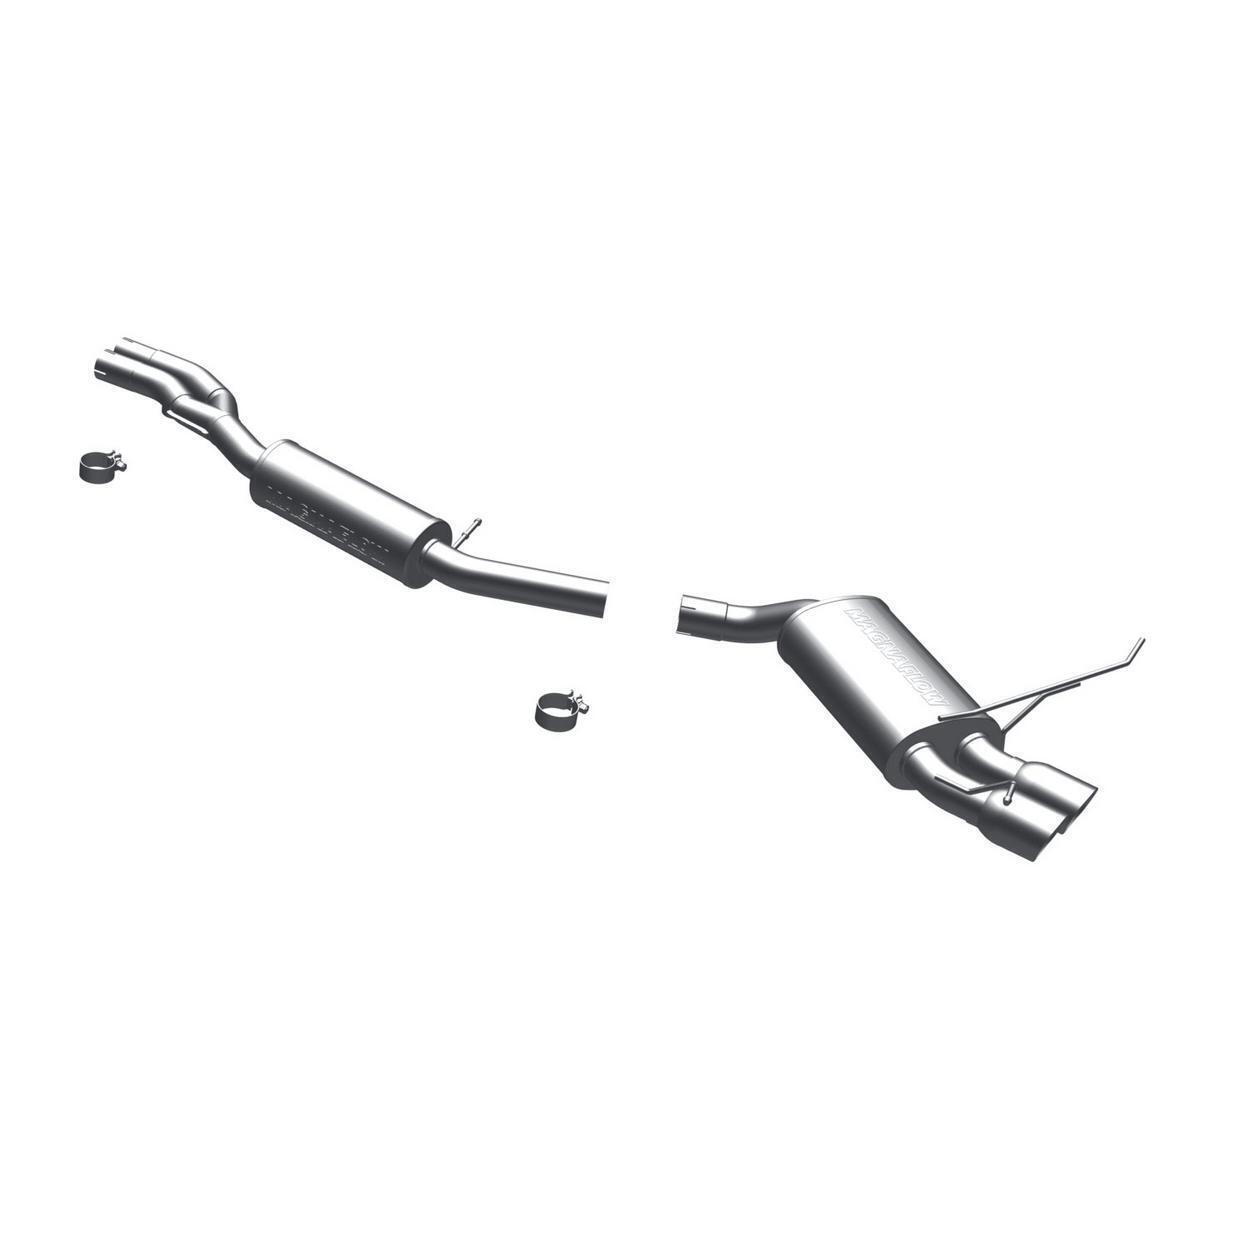 MagnaFlow Exhaust System Kit - Fits: 2008-2013 Bmw 128i Touring Series Stainless